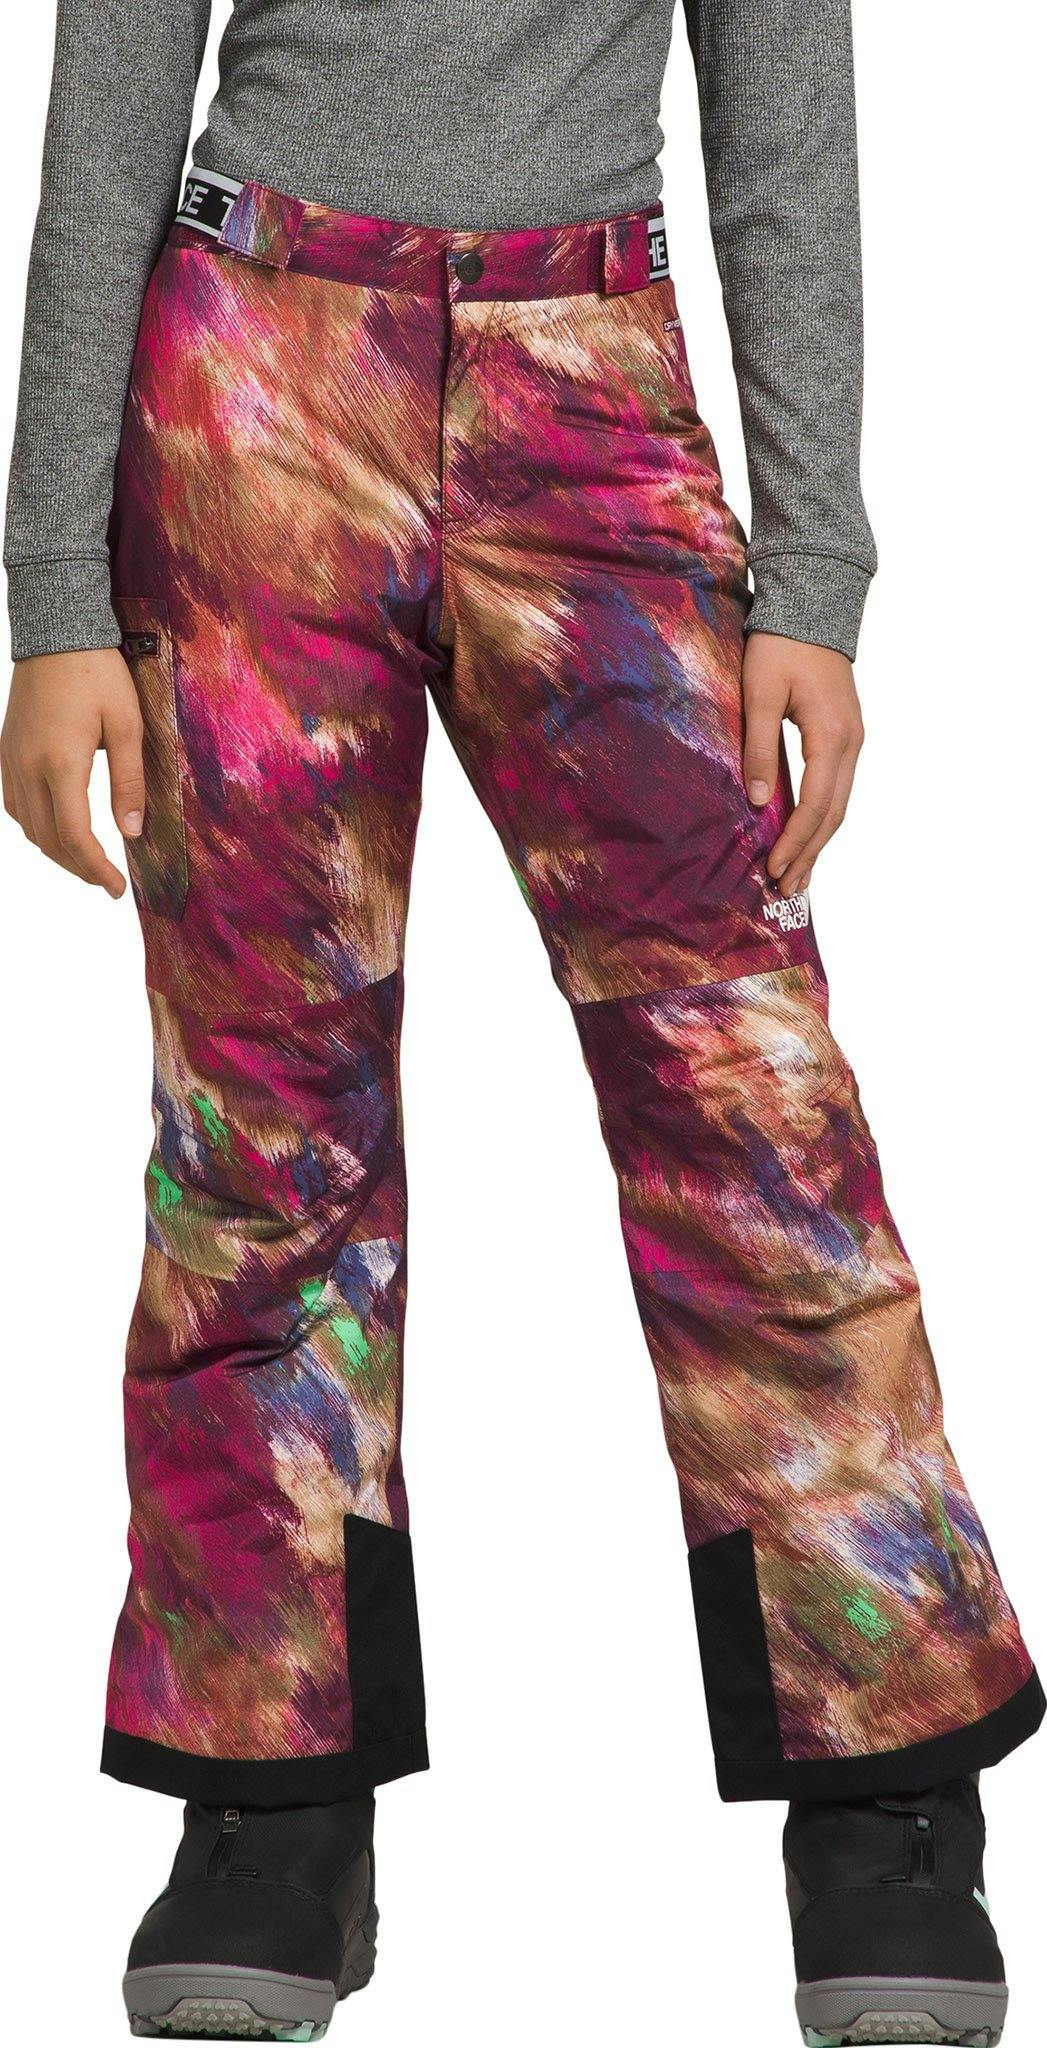 Product image for Freedom Insulated Pants - Girls